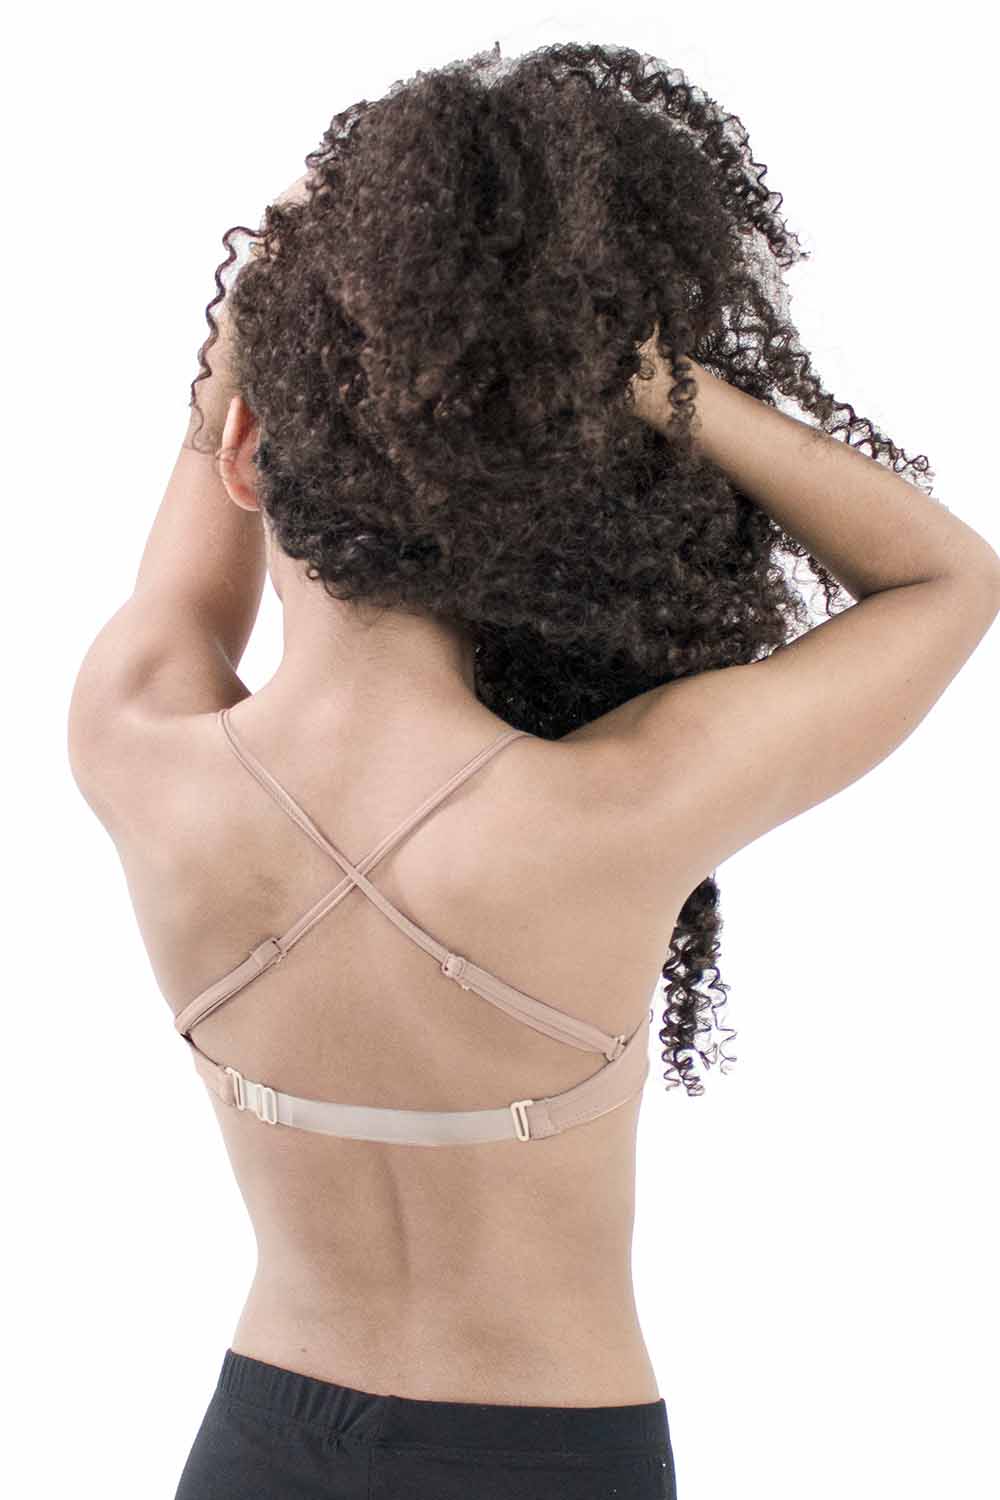 Wholesale strapless clear back strap bra For Supportive Underwear 